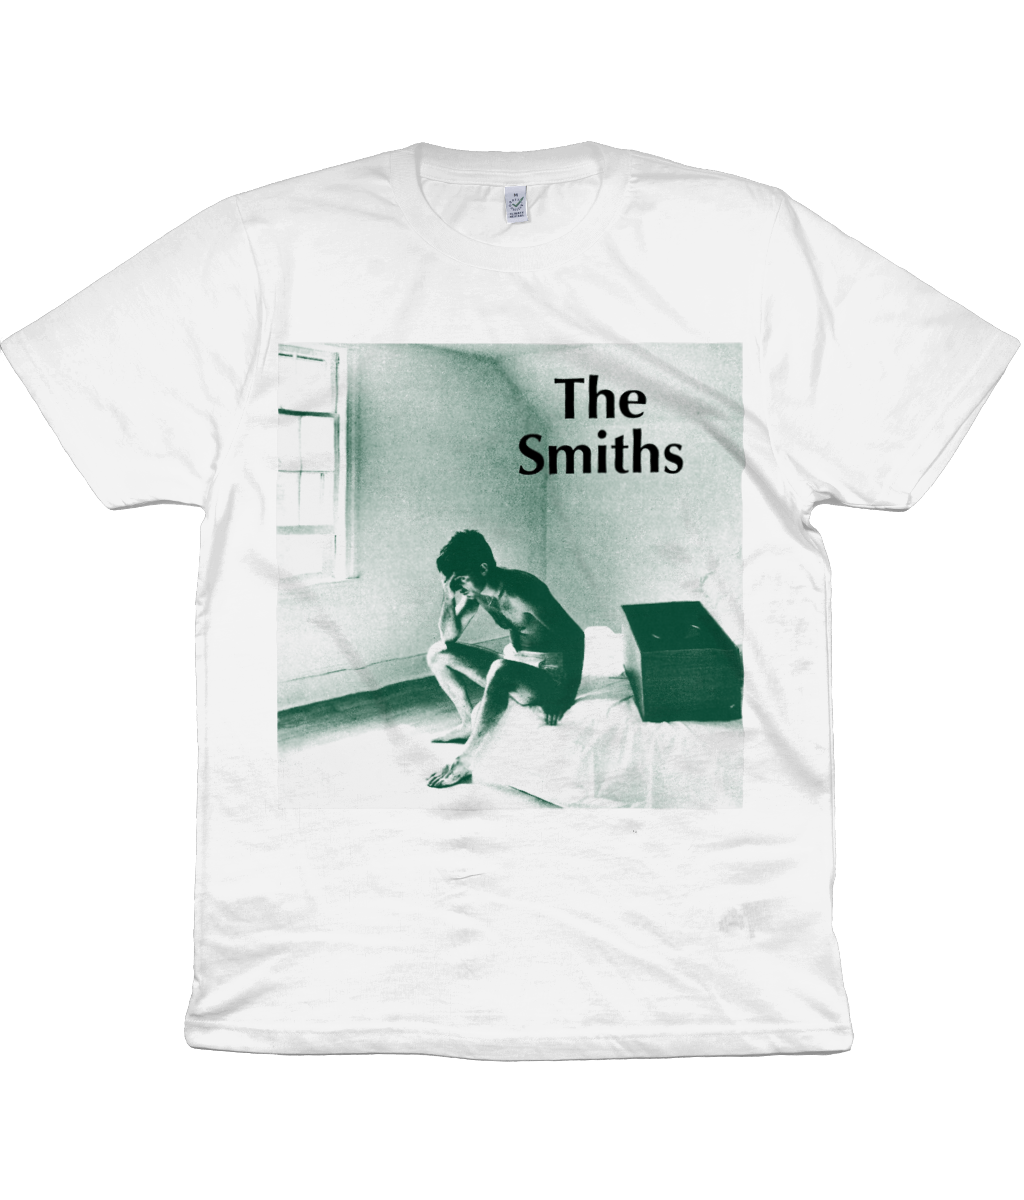 The Smiths - William, It Was Really Nothing - Promo - 1984